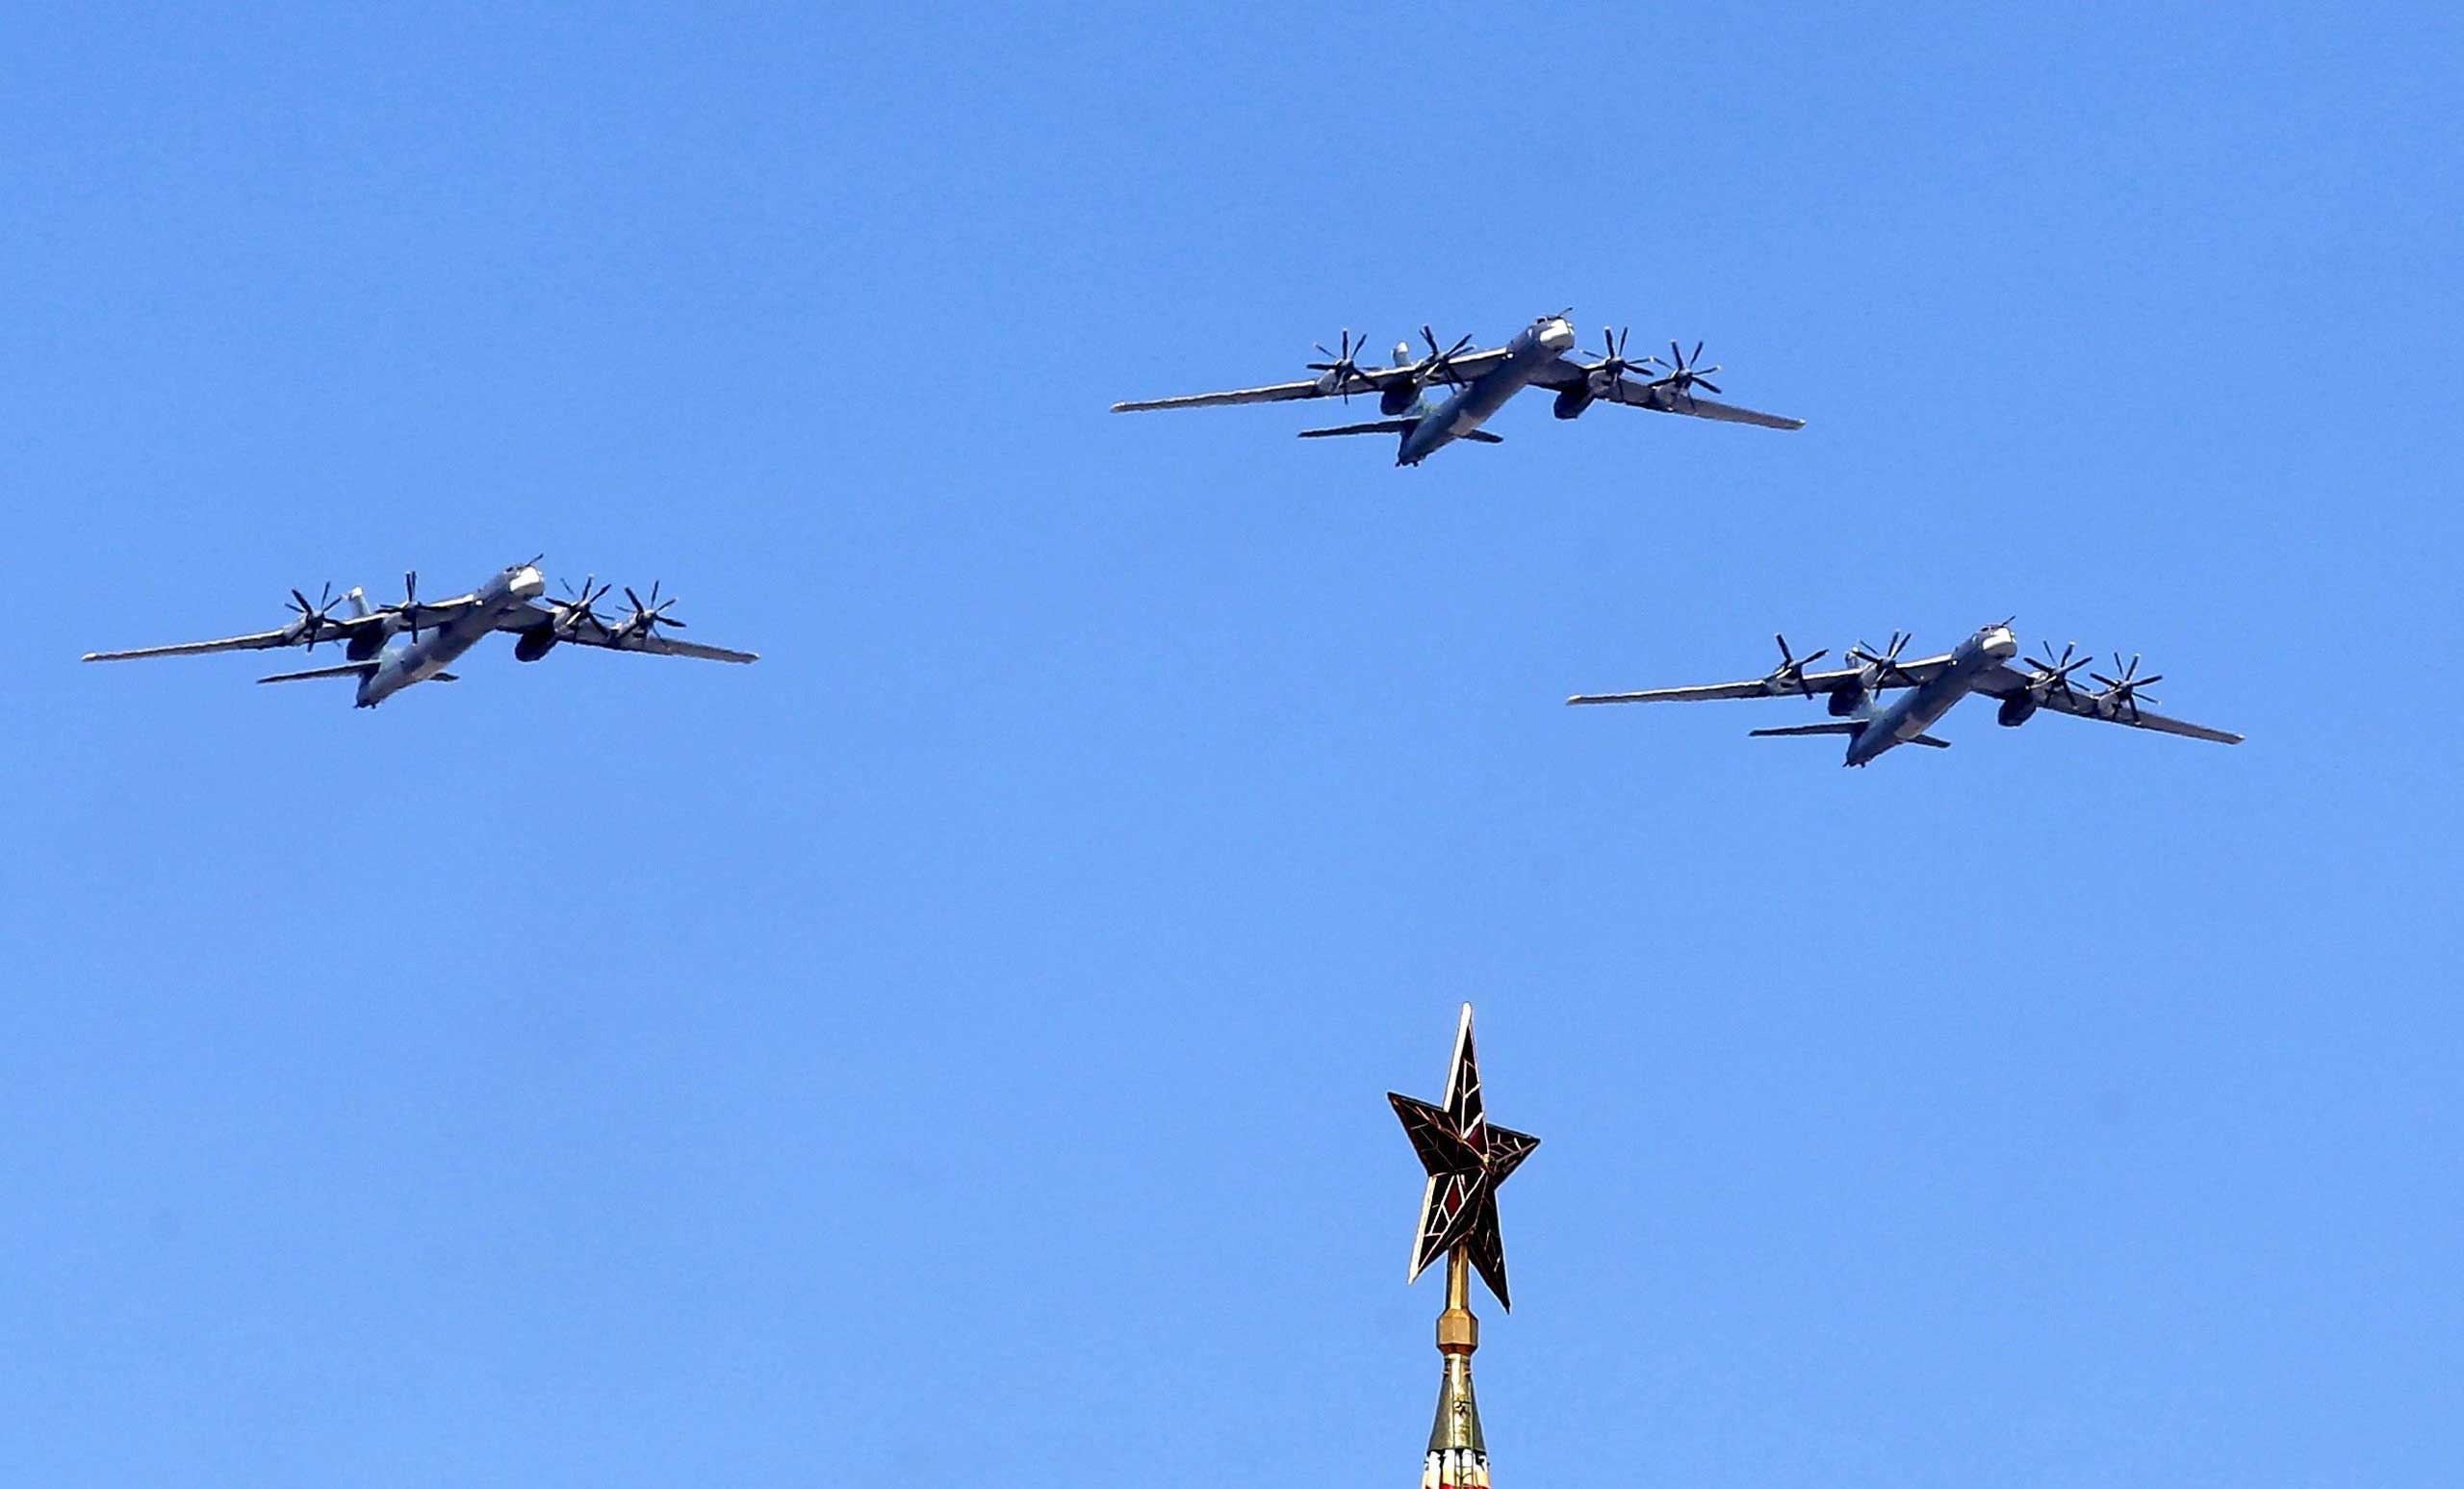 Russian TU-95 MS bombers and missile carriers above the Kremlin, during the rehearsal for the Victory Day military parade at the Red Square in Moscow, in May 2015. (Maxim Shipenkov—EPA)